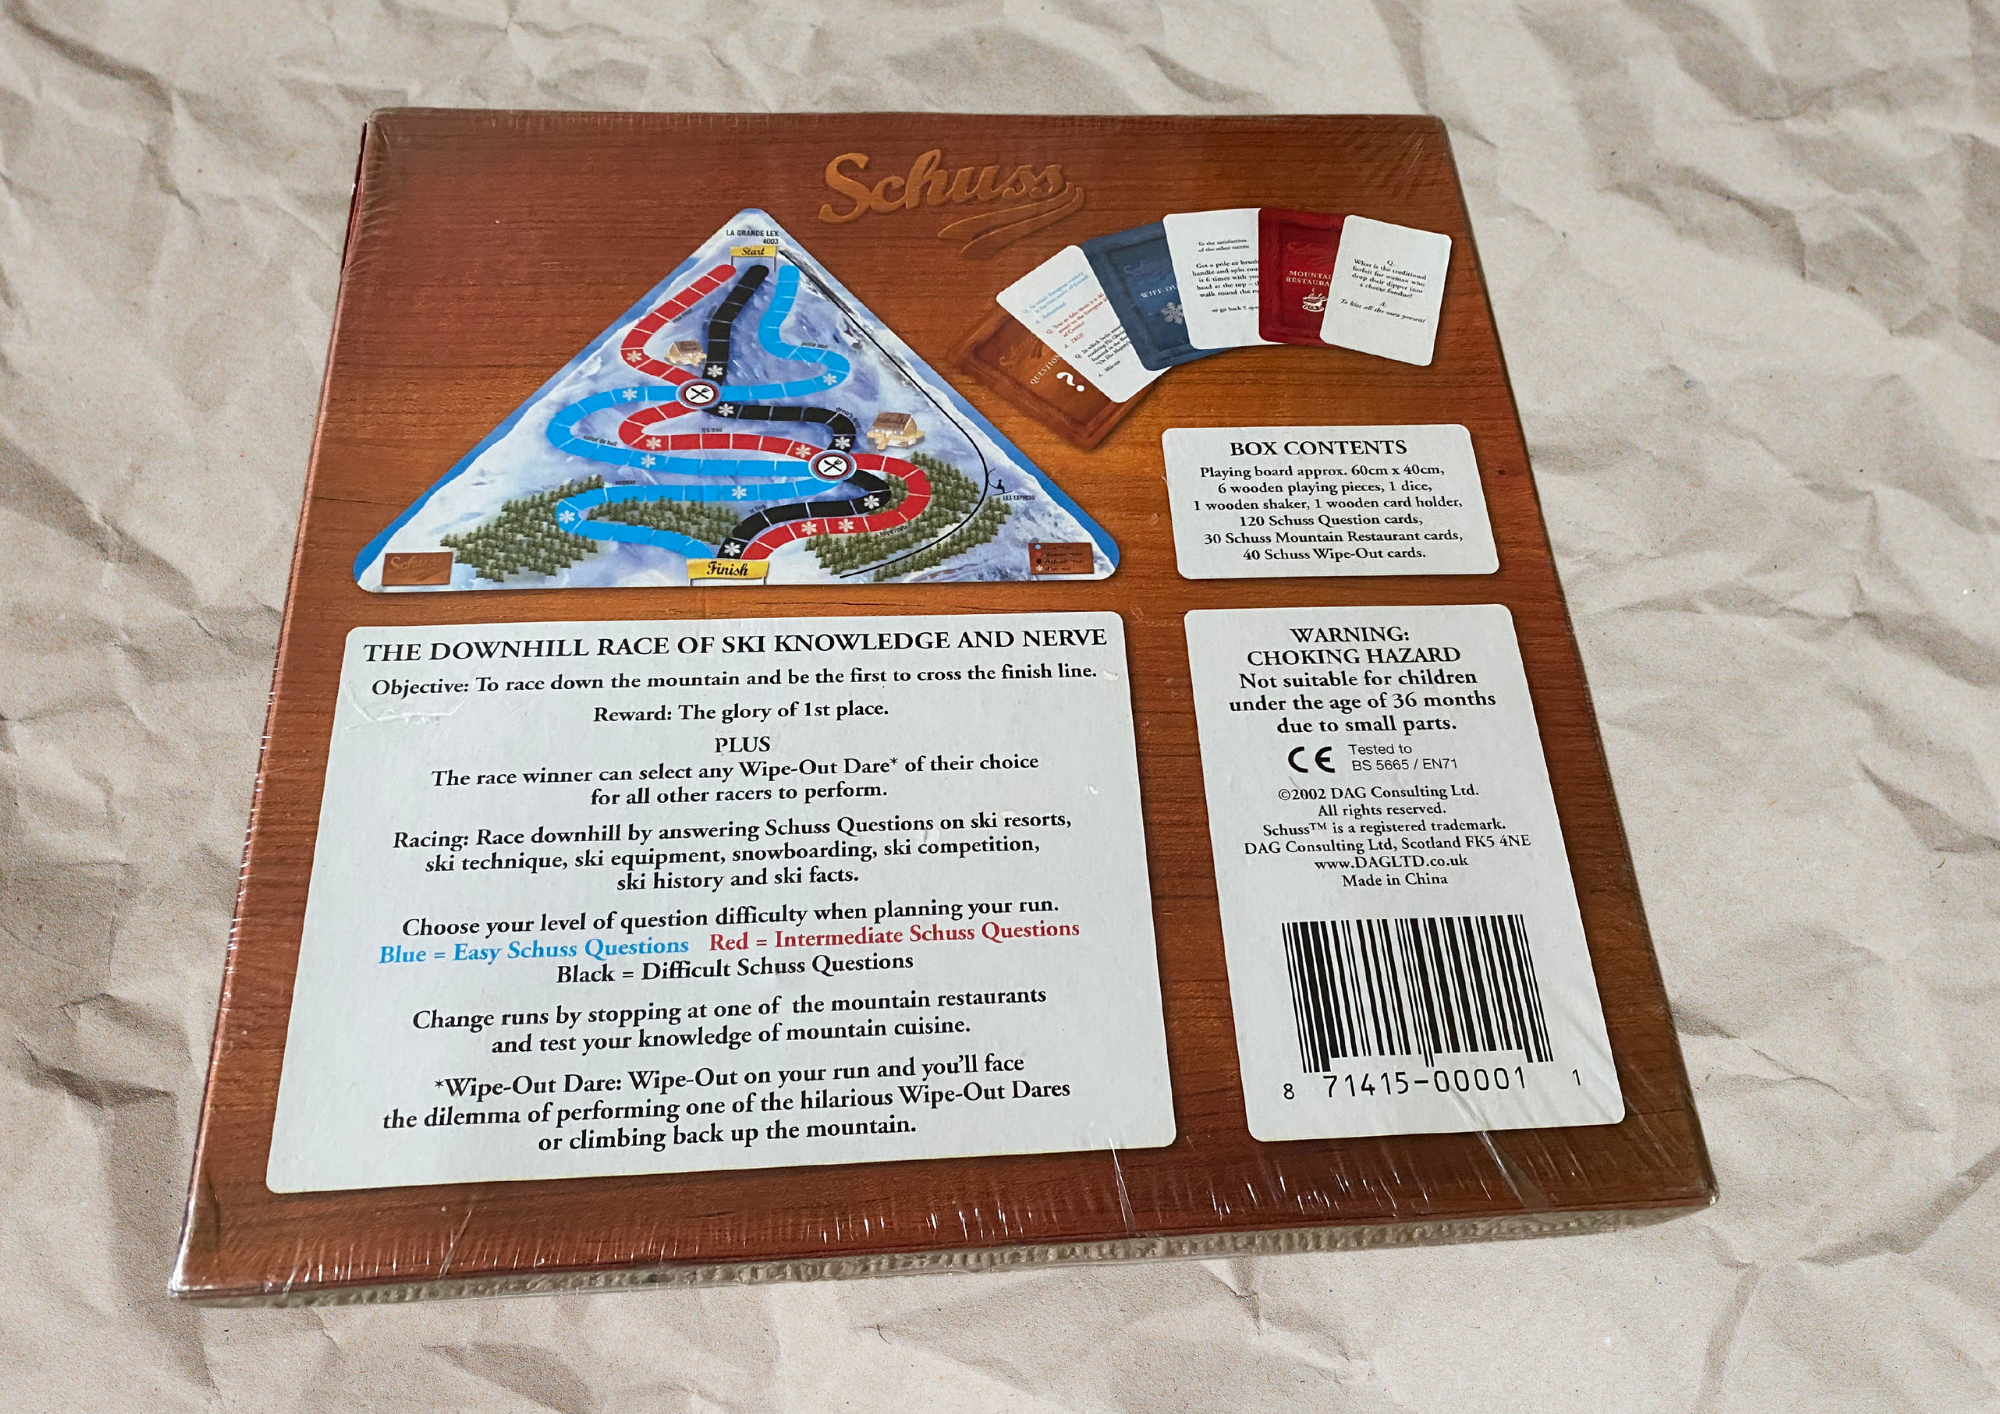 Schuss Game: The downhill race of ski knowledge and nerve! Back of Box